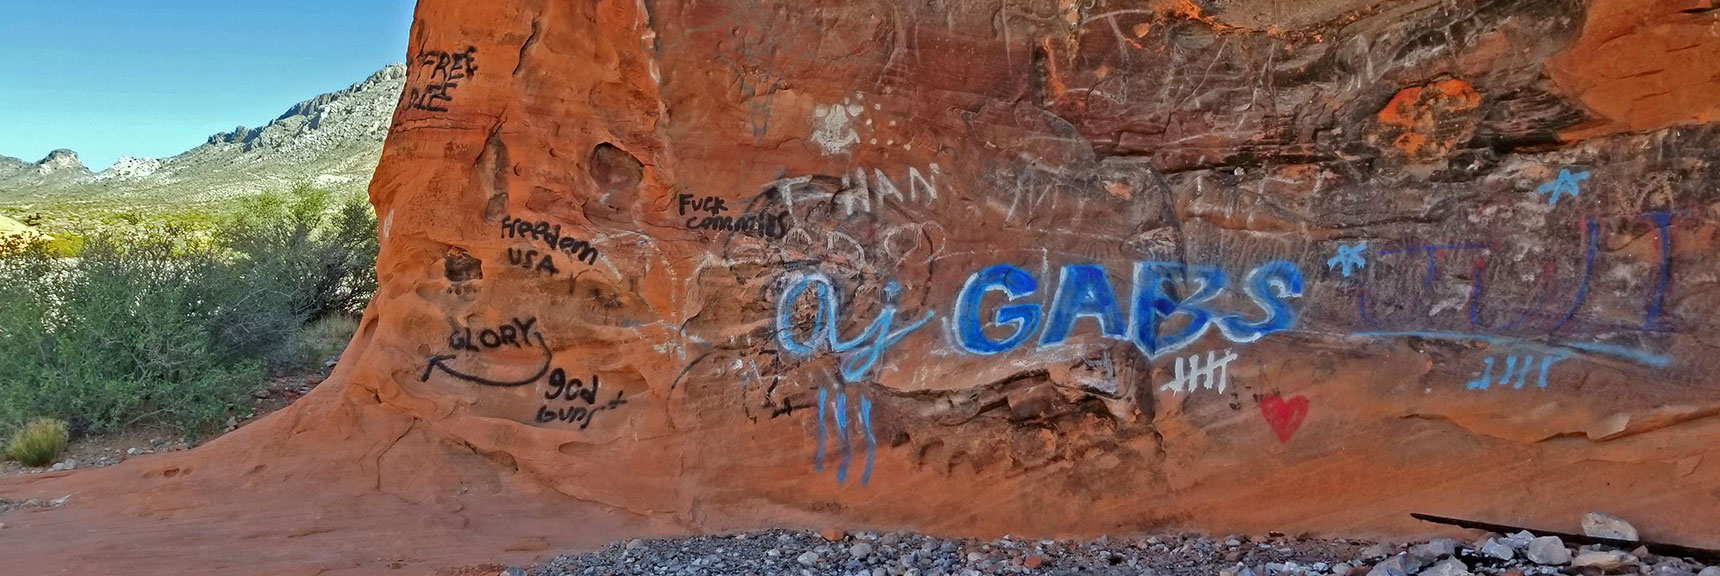 Graffiti Mars Only a Few Red Rock Areas, Mostly Here | Little Red Rock Las Vegas, Nevada, Near La Madre Mountains Wilderness